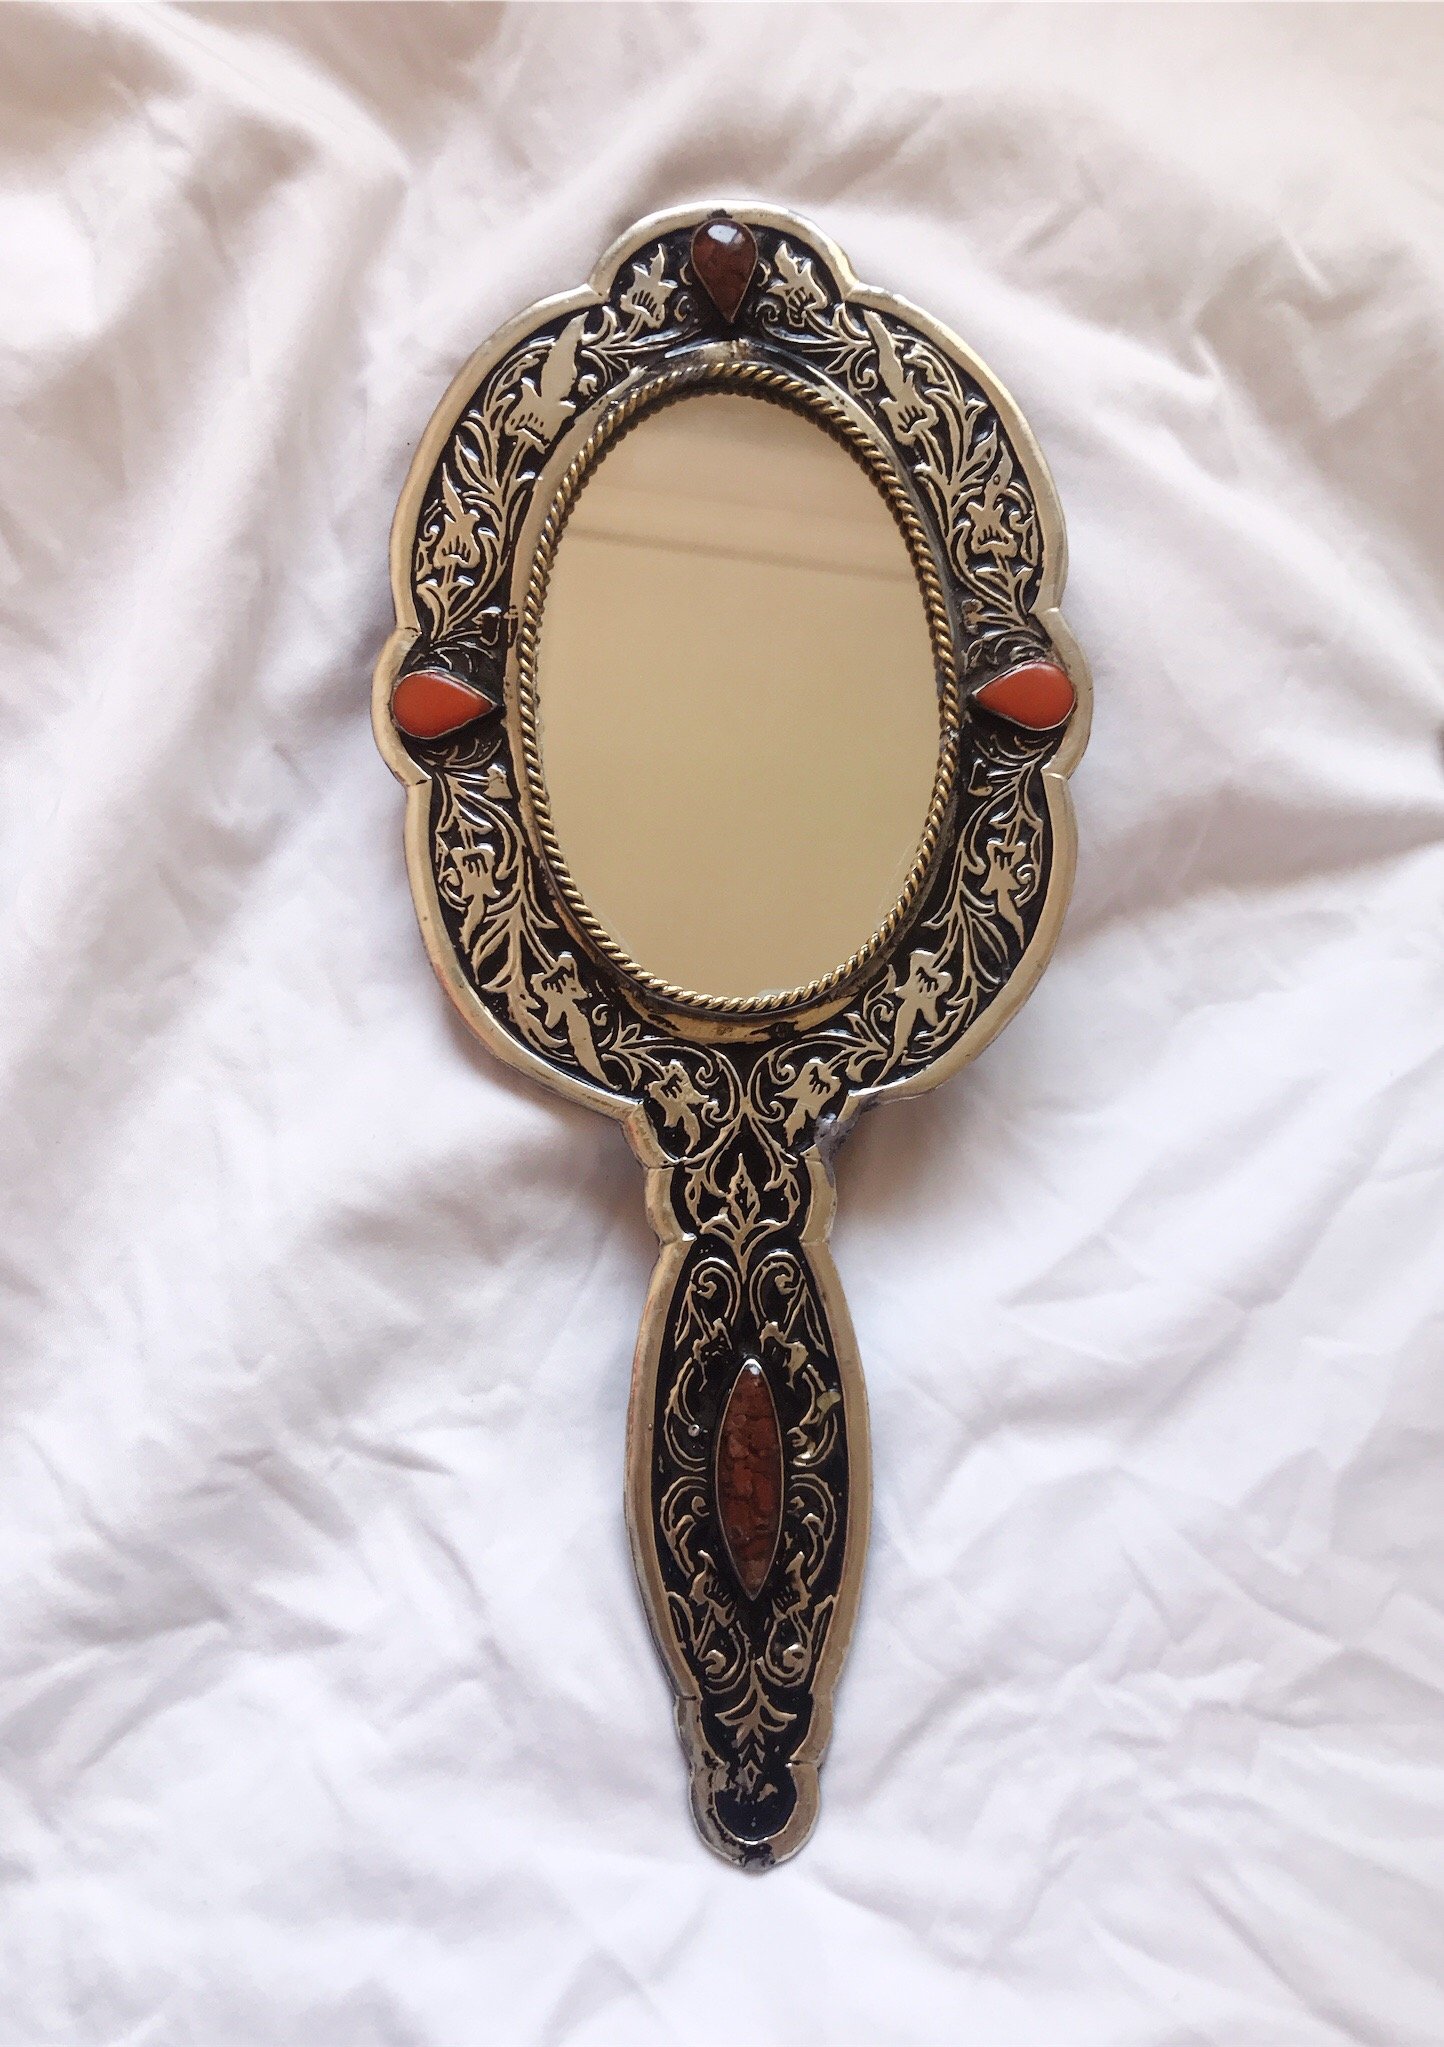 Image of SOLD OUT - MIROIR PORTE CHANCE